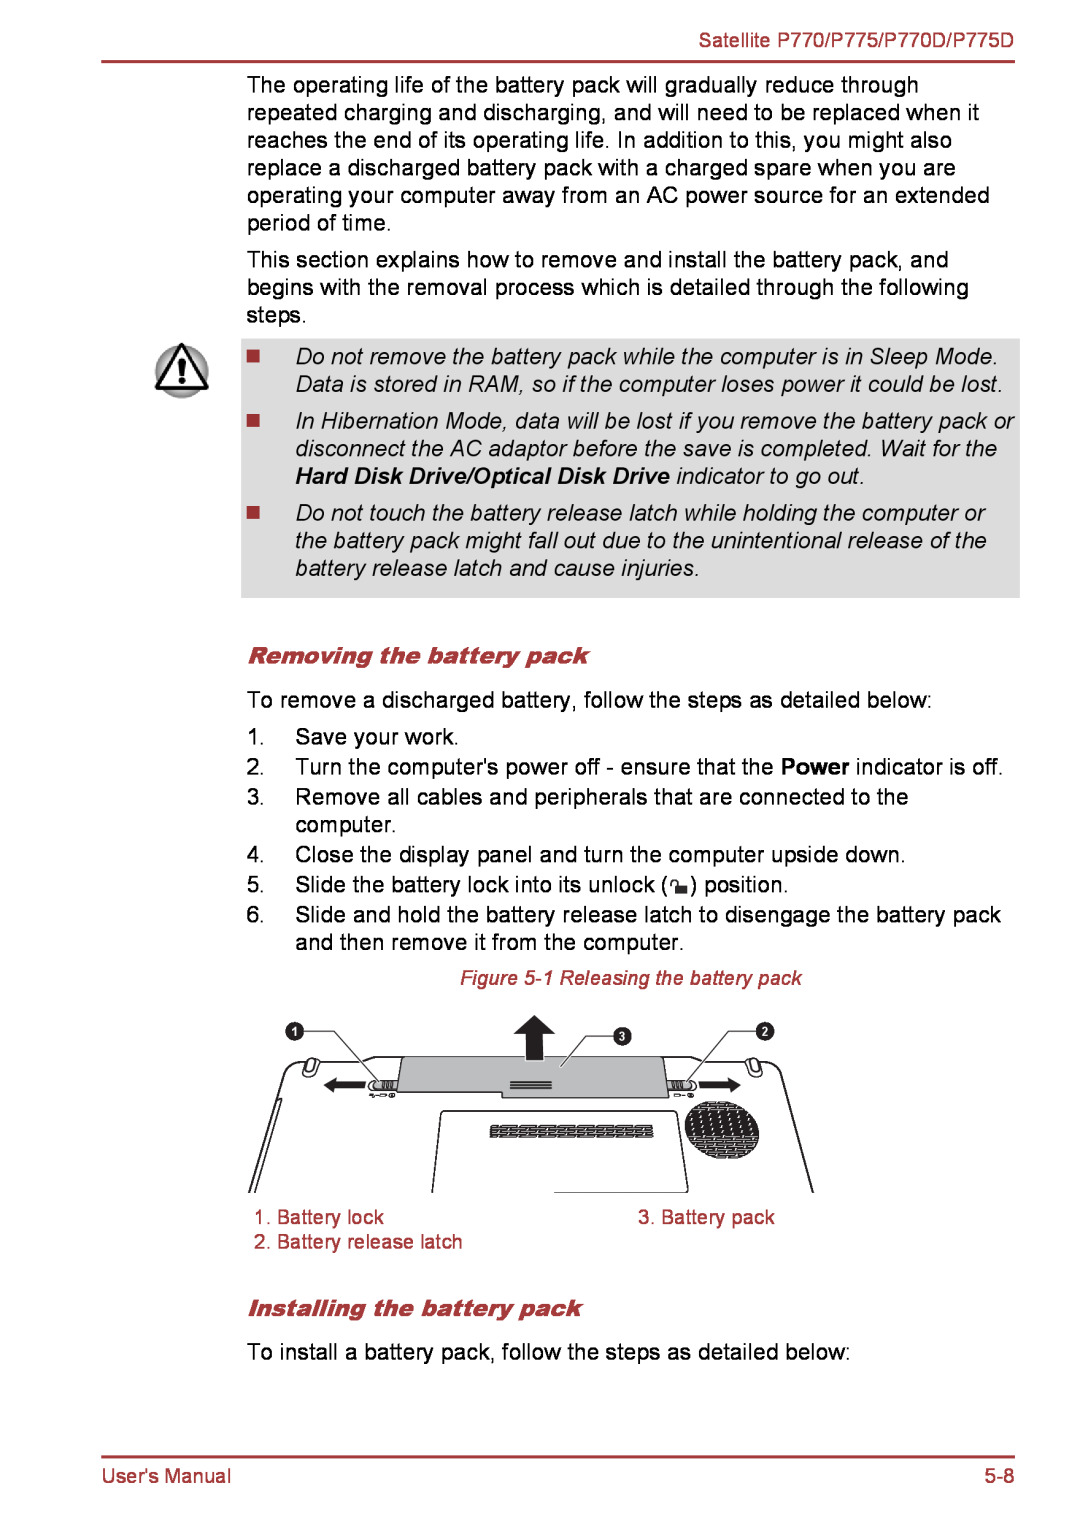 Toshiba P770 user manual Removing the battery pack, Installing the battery pack 